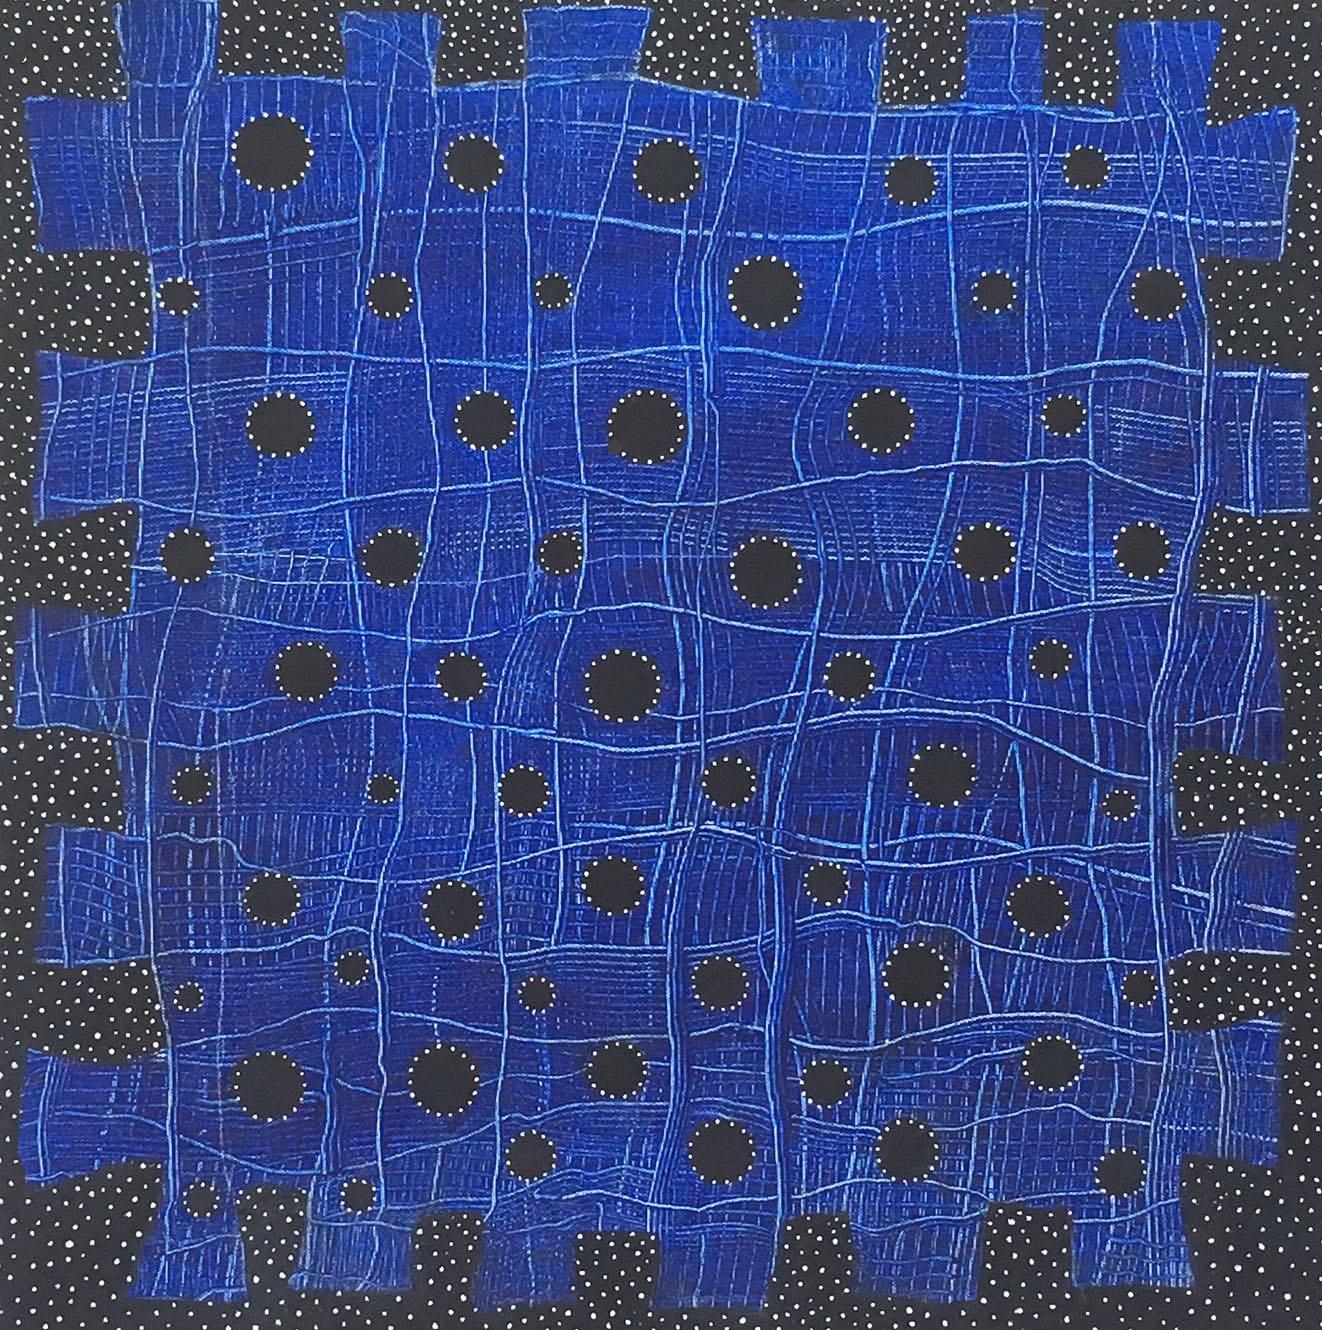 Andra Samelson, Starstruck 2,  Acrylic on canvas, 20 x 20 inches, 2018